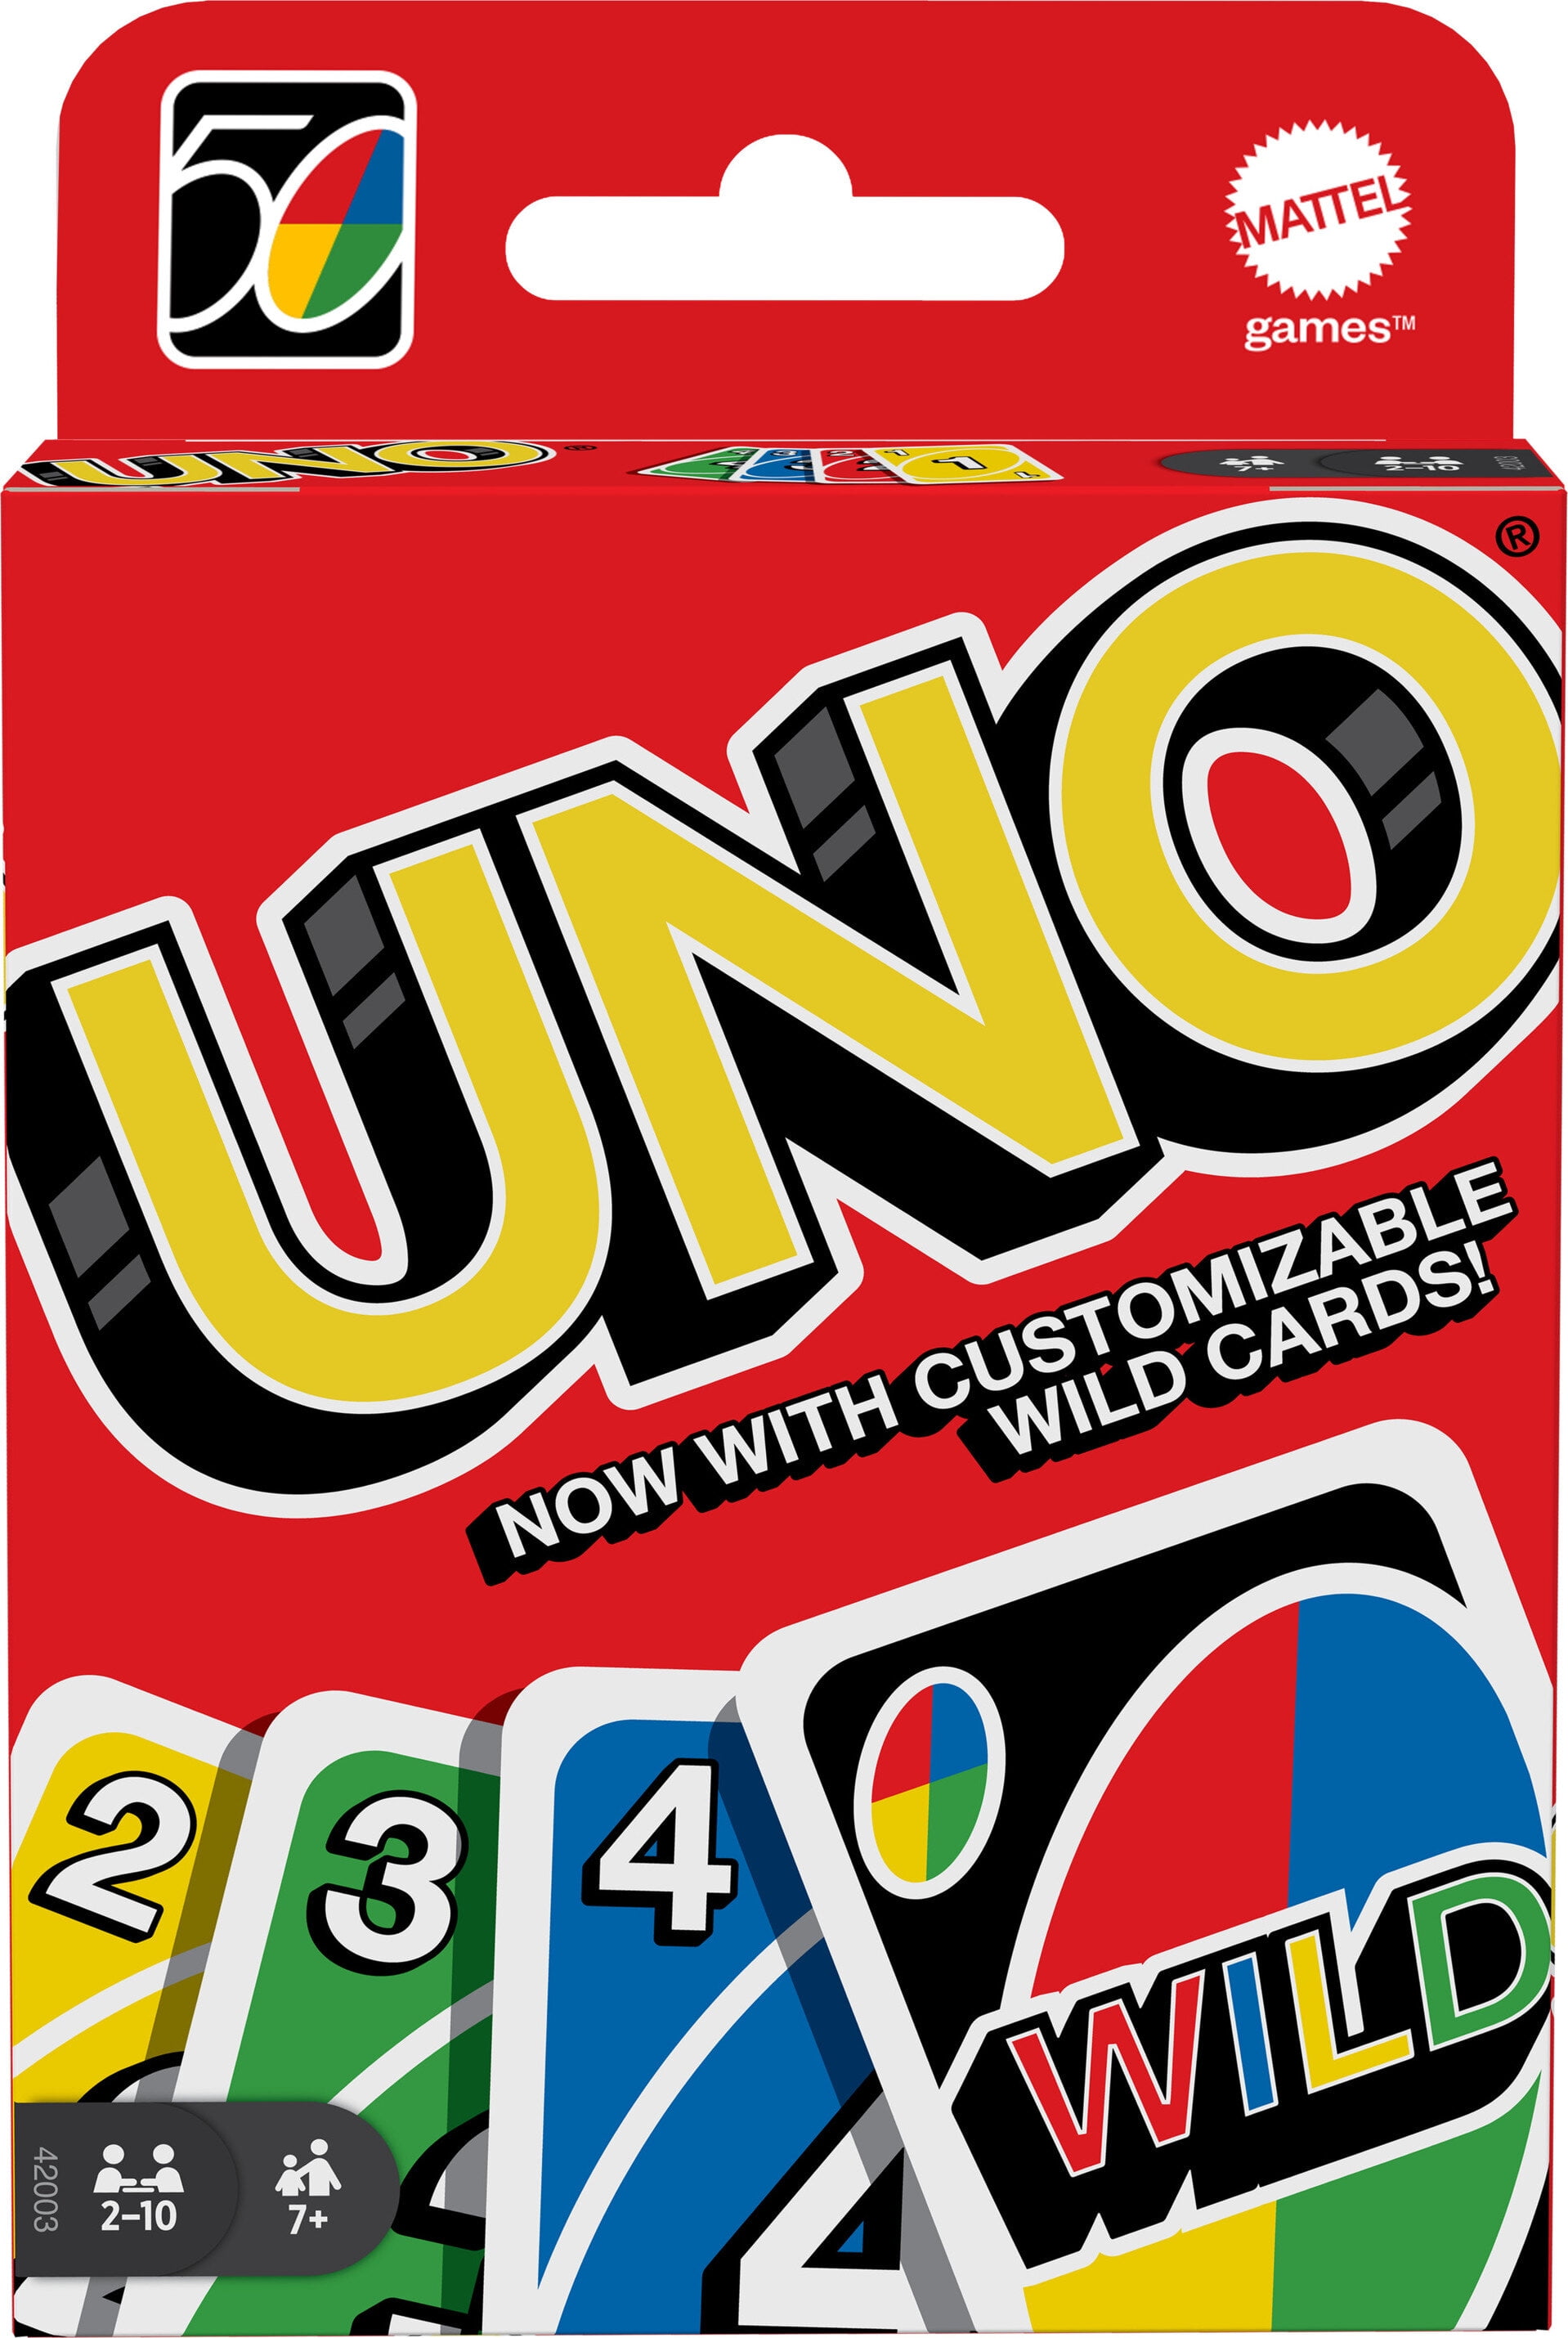 UNO Card Game for Kids, Adults & Family Game Night, Original UNO Game of Matching Colors & Numbers $9.66